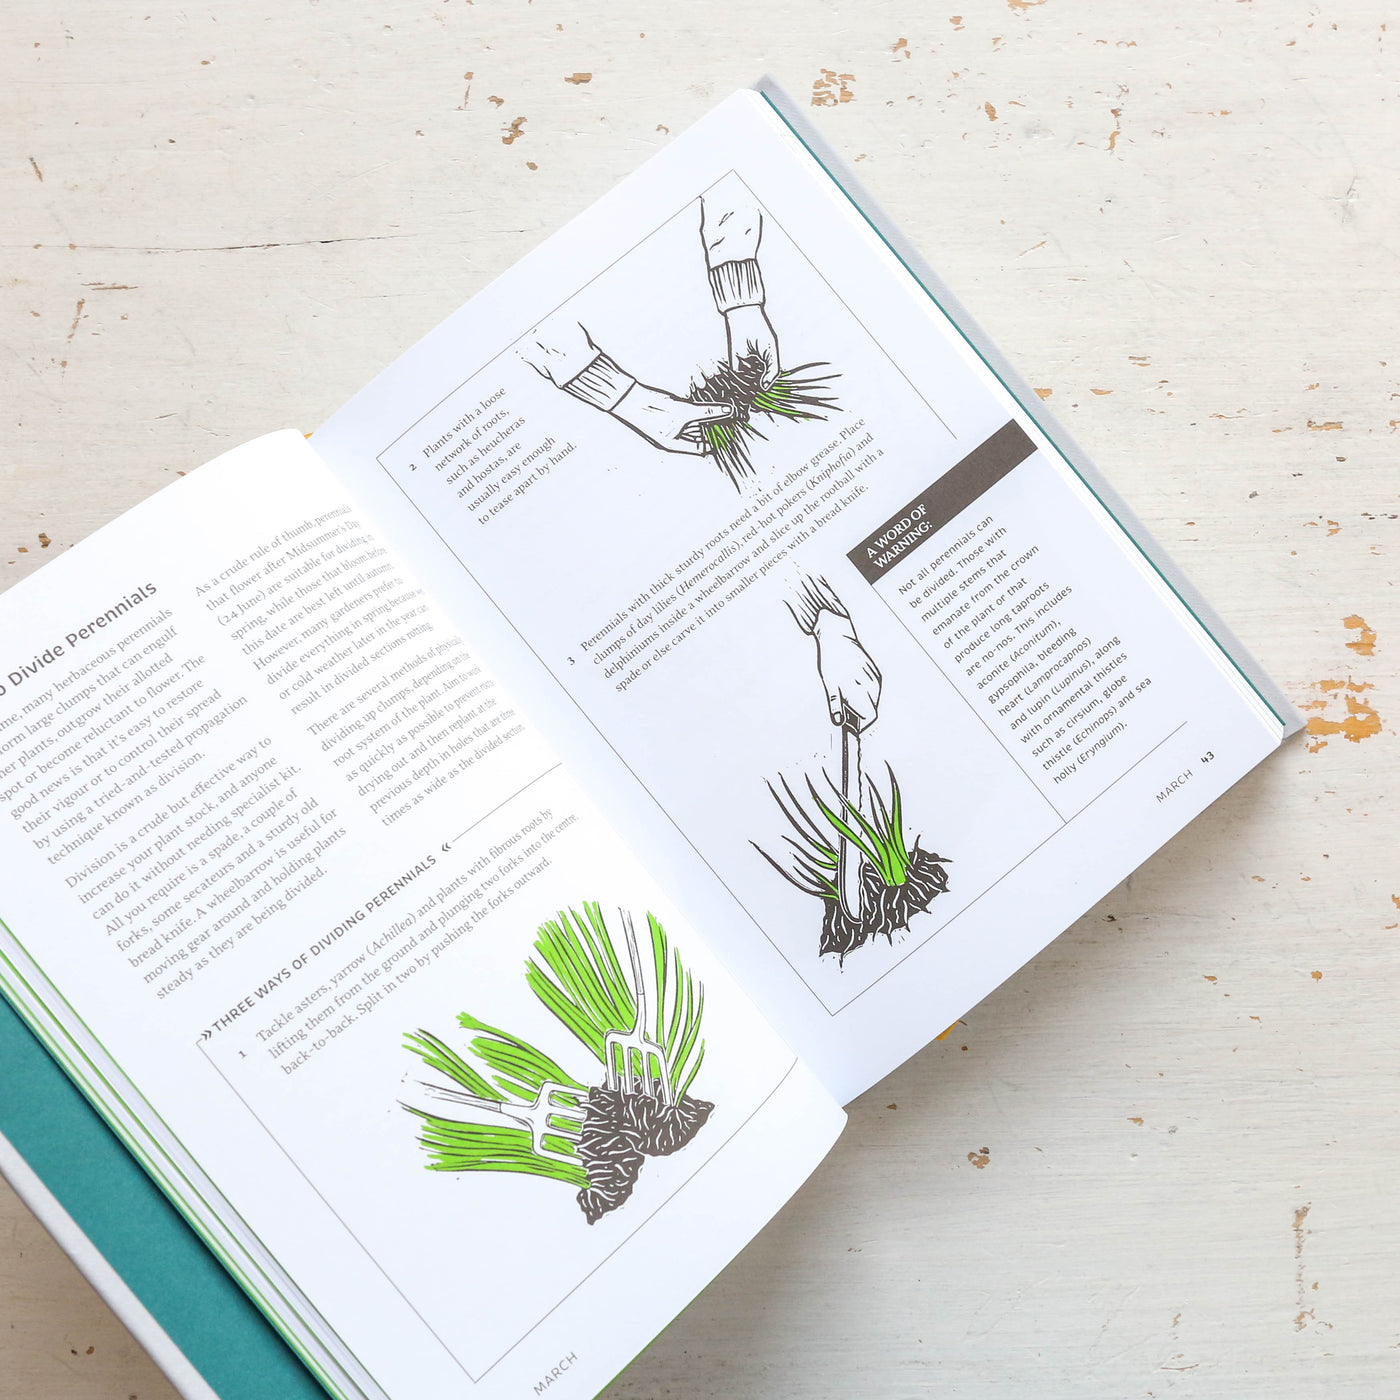 The Gardener's Yearbook : A month-by-month guide